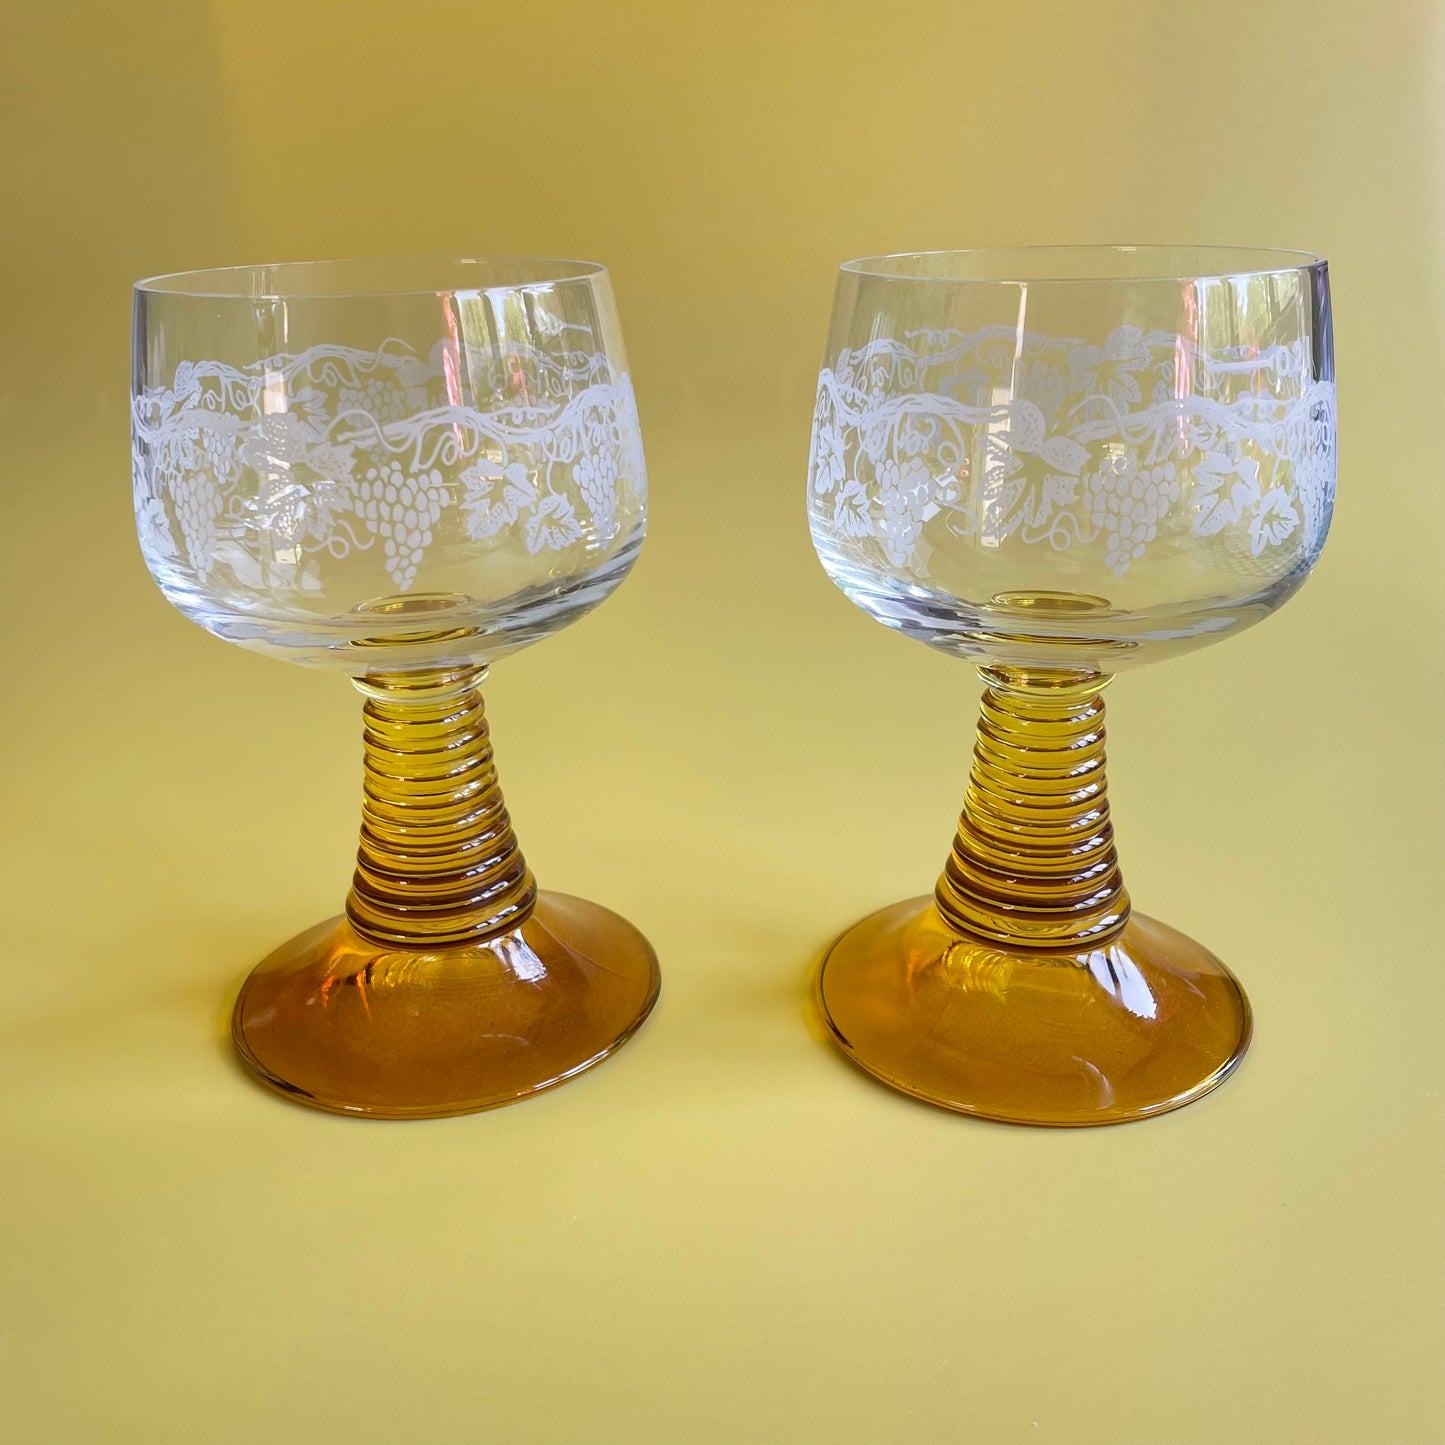 4 x Beehive Vintage Drinking Glasses With Amber Stems